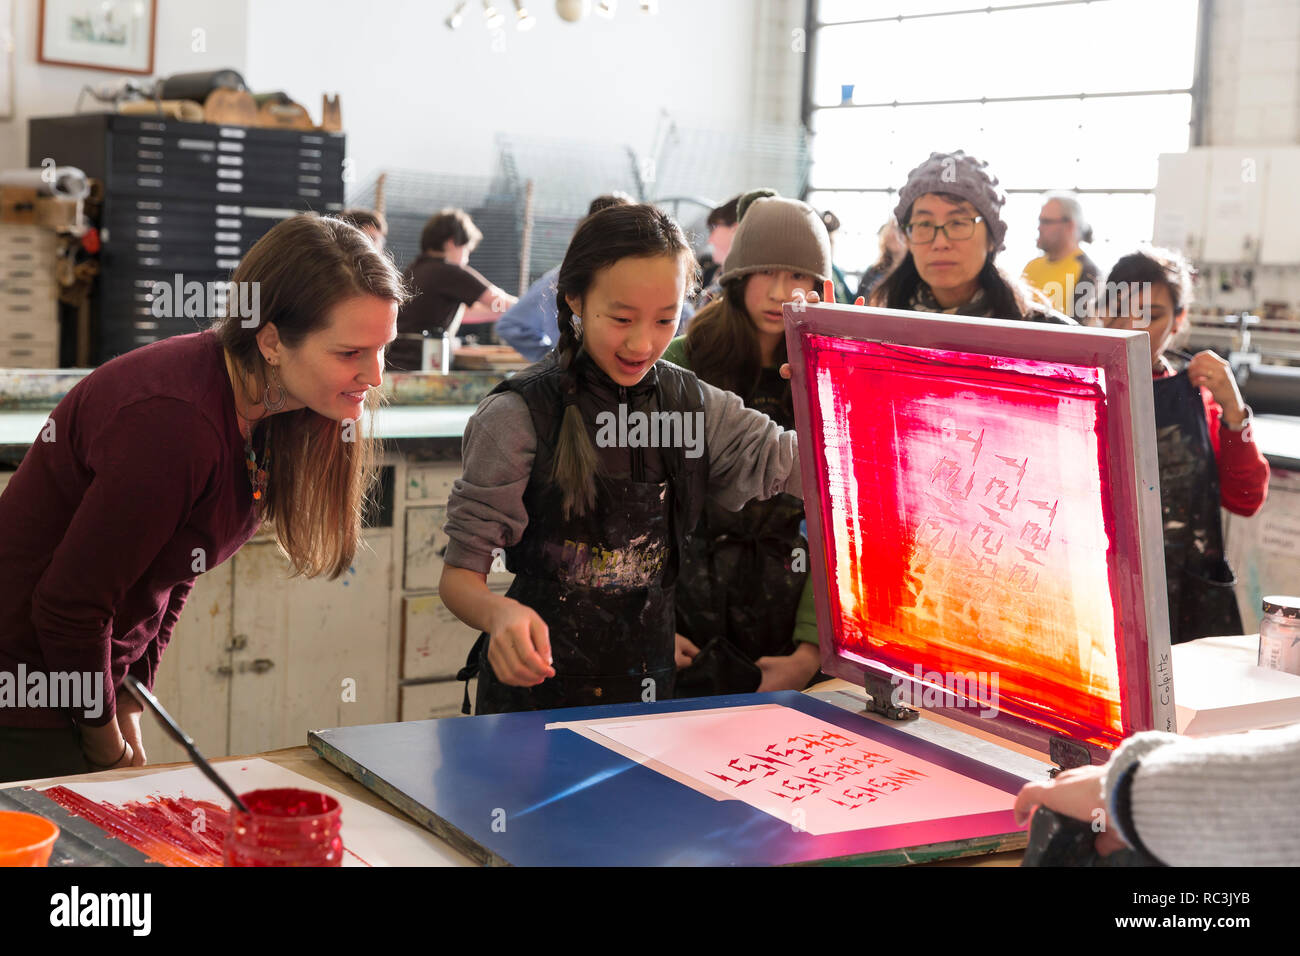 Seattle, Washington, USA. 12th Janaury 2019.  A group of young women screen printing at the Pratt Fine Arts Center print studio. Supporters were invited to create positive resistance poster prints at a work party for the upcoming Womxn’s March on Seattle 2019. The rally and march, organized by Seattle Womxn Marching Forward, will be held on January 19, 2019 kicking off a weekend of building power through community, protest, and activism. Credit: Paul Christian Gordon/Alamy Live News Stock Photo